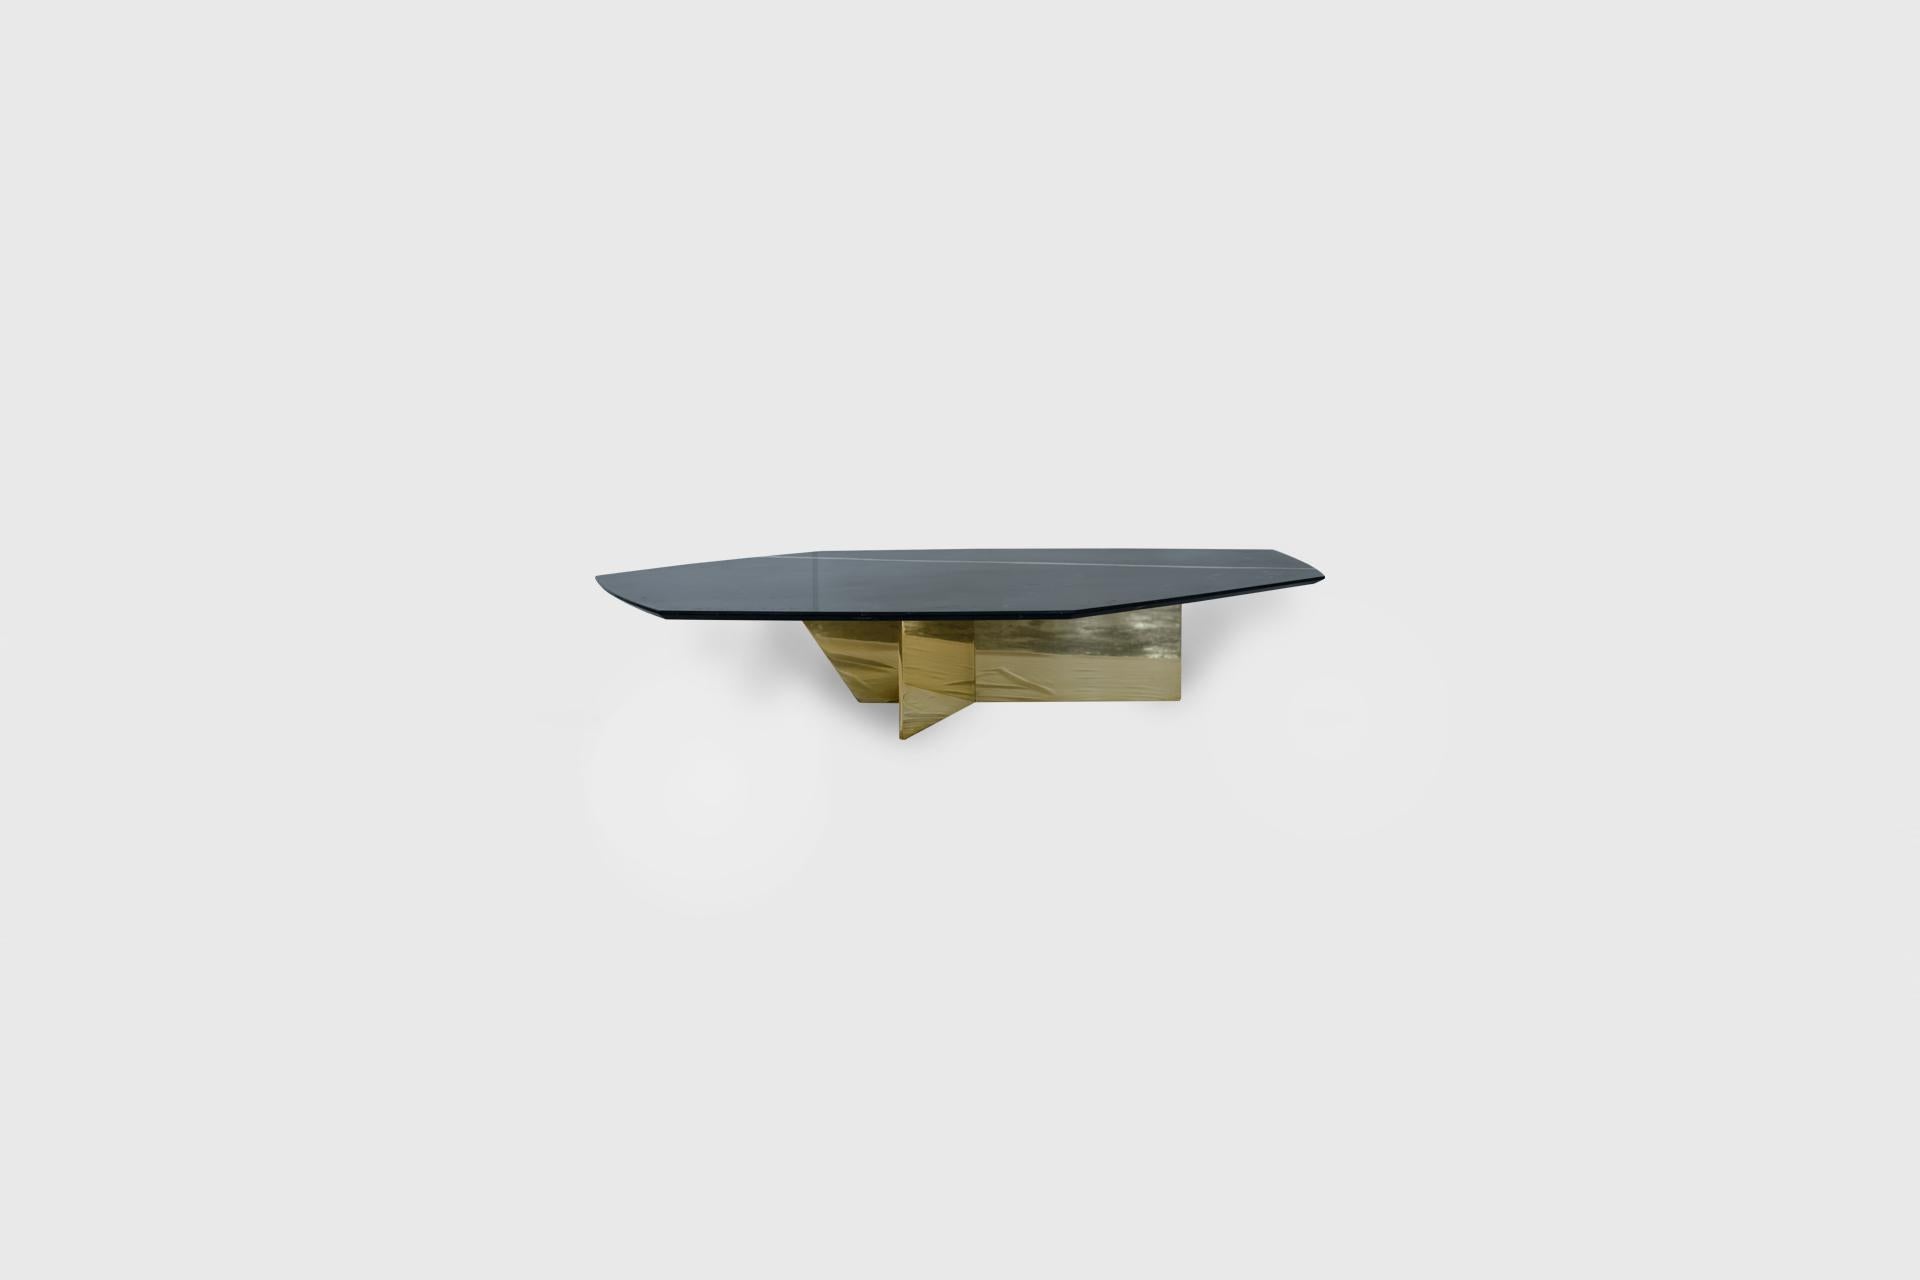 Geometrik Negro Monterrey Stone and Brass Small Coffee Table by Atra Design
Dimensions: D 90 x W 130 x H 32 cm.
Materials: Negro Monterrey stone and brass.

Available in three sizes. Different marble options available: Verde Tikal, Negro Monterrey,